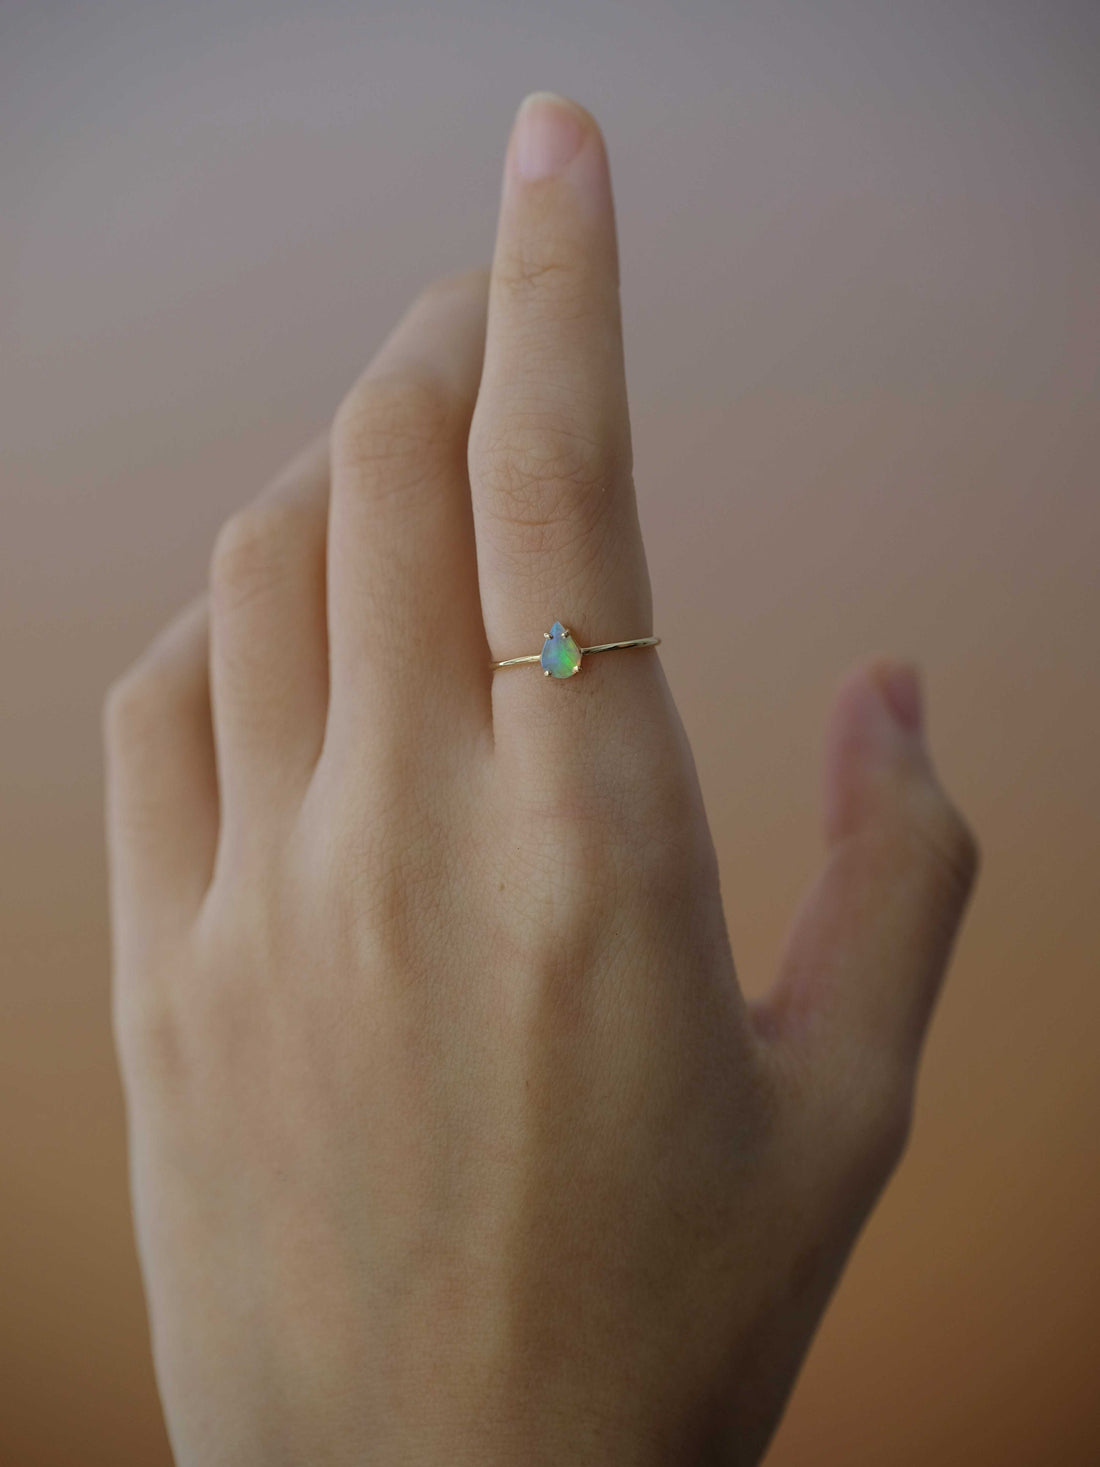 Drop Opal Thin Solitaire Ring, 18k solid gold